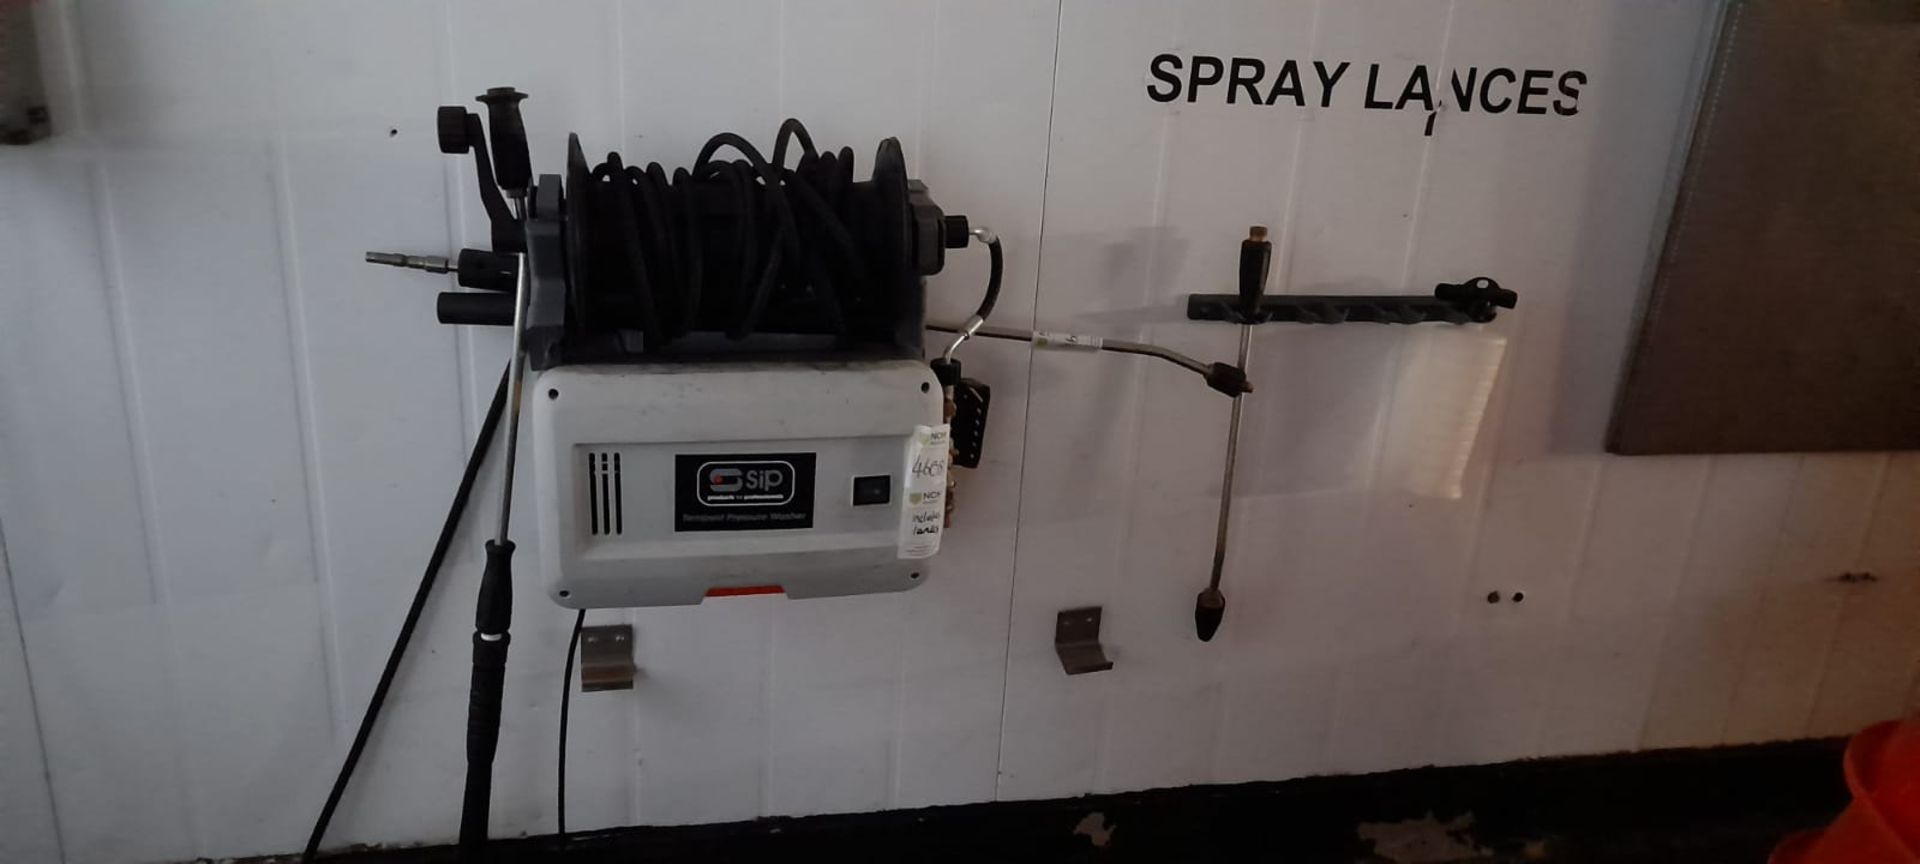 Wall mounted pressure washer